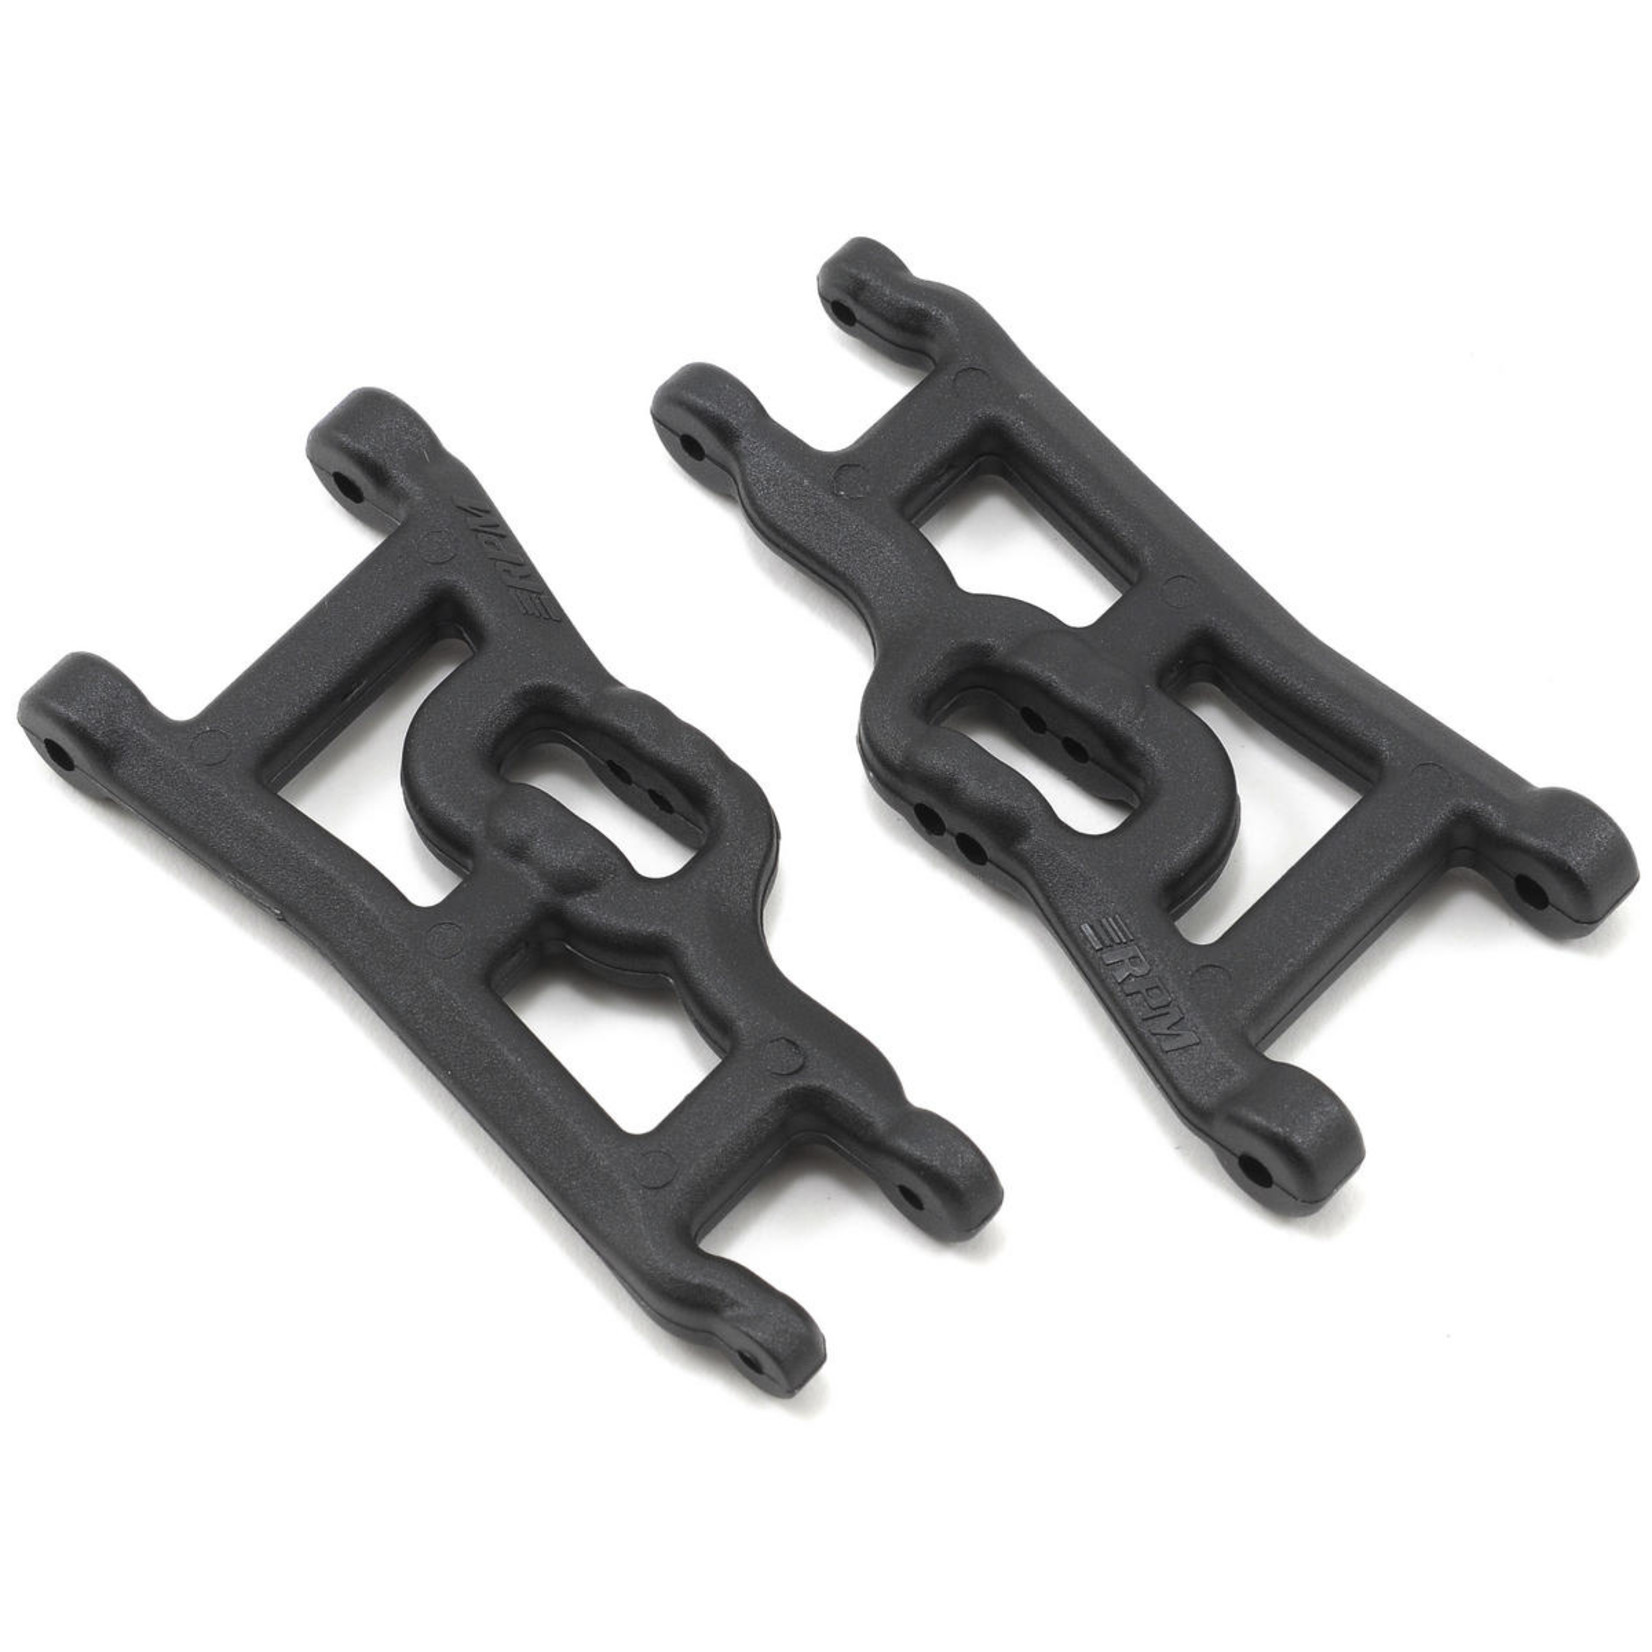 RPM Front A-arms (2), Black: RU, ST, SLH